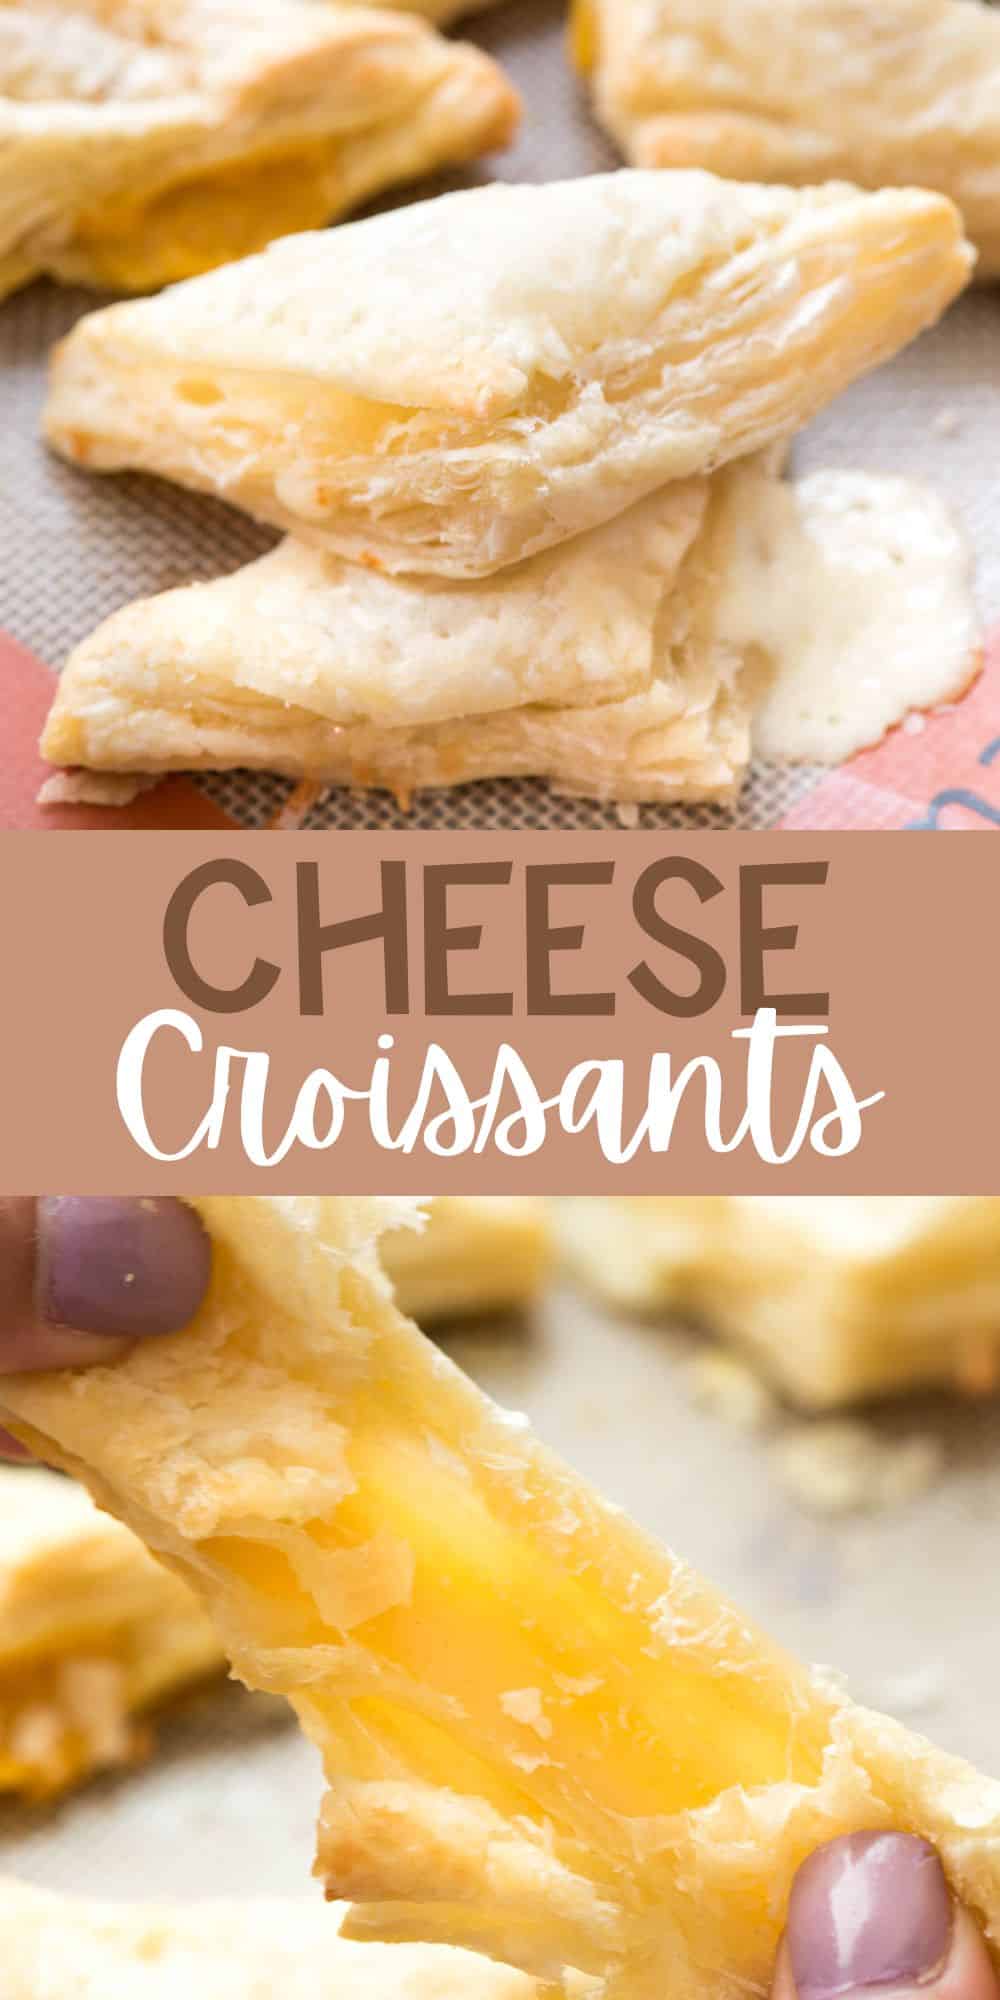 two photos of two cheese croissants stacked on a mat with words on the image.